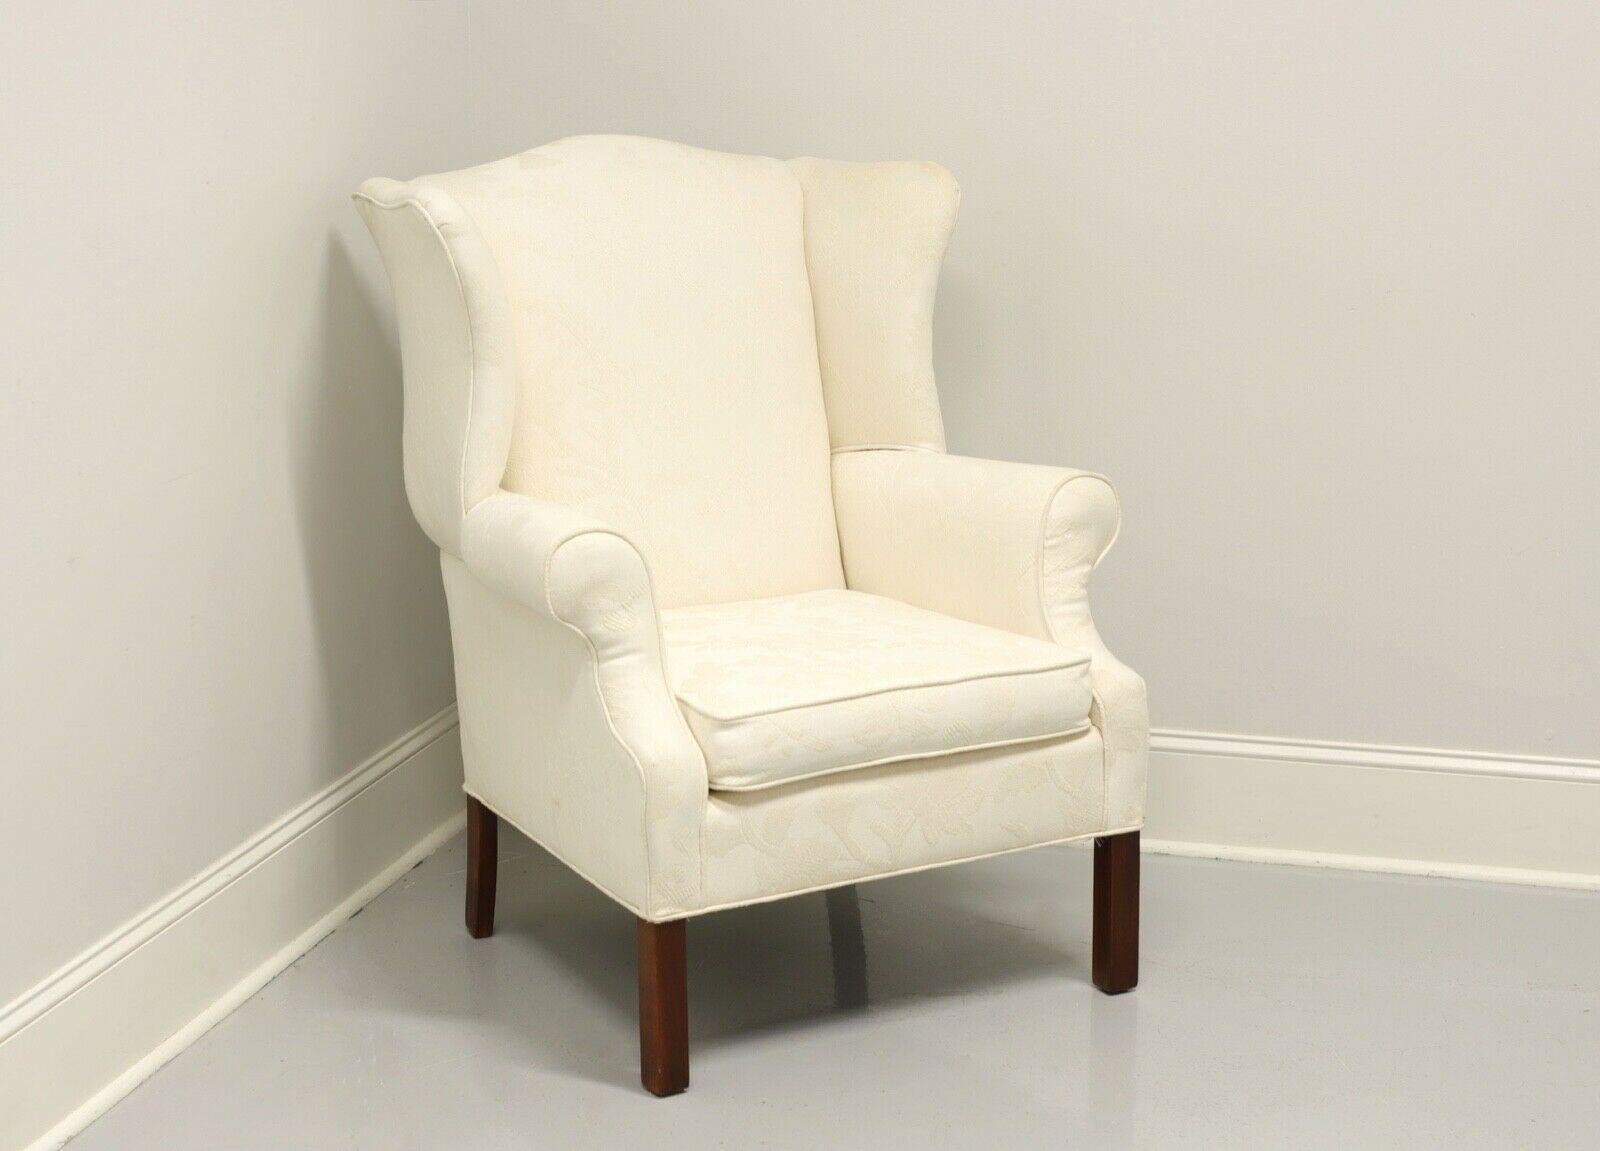 Vintage Mahogany Frame Chippendale Style Wing Back Chair in Neutral Fabric 2